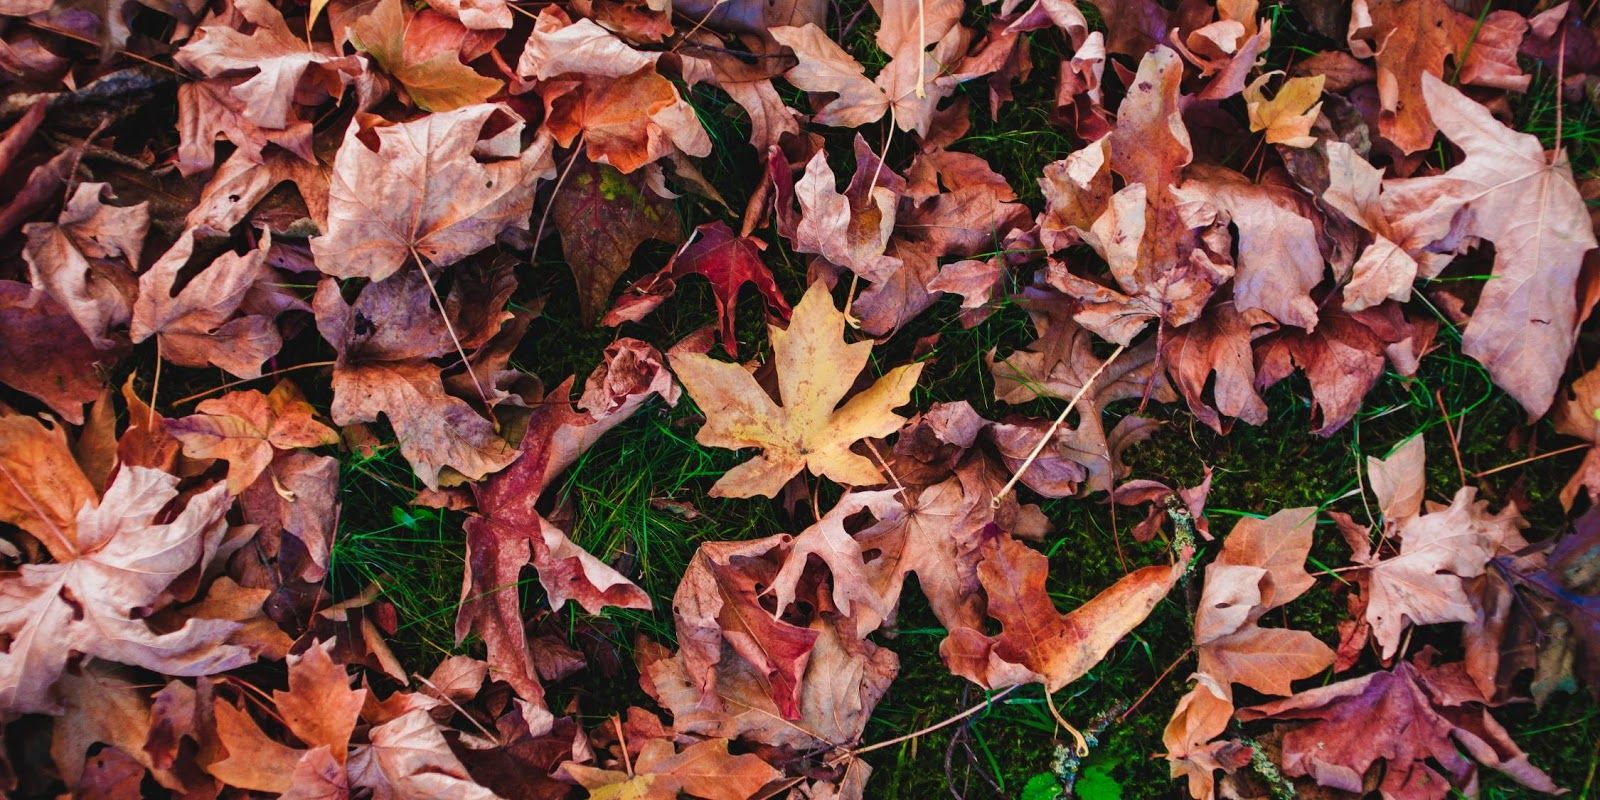 How to prepare your lawn for autumn